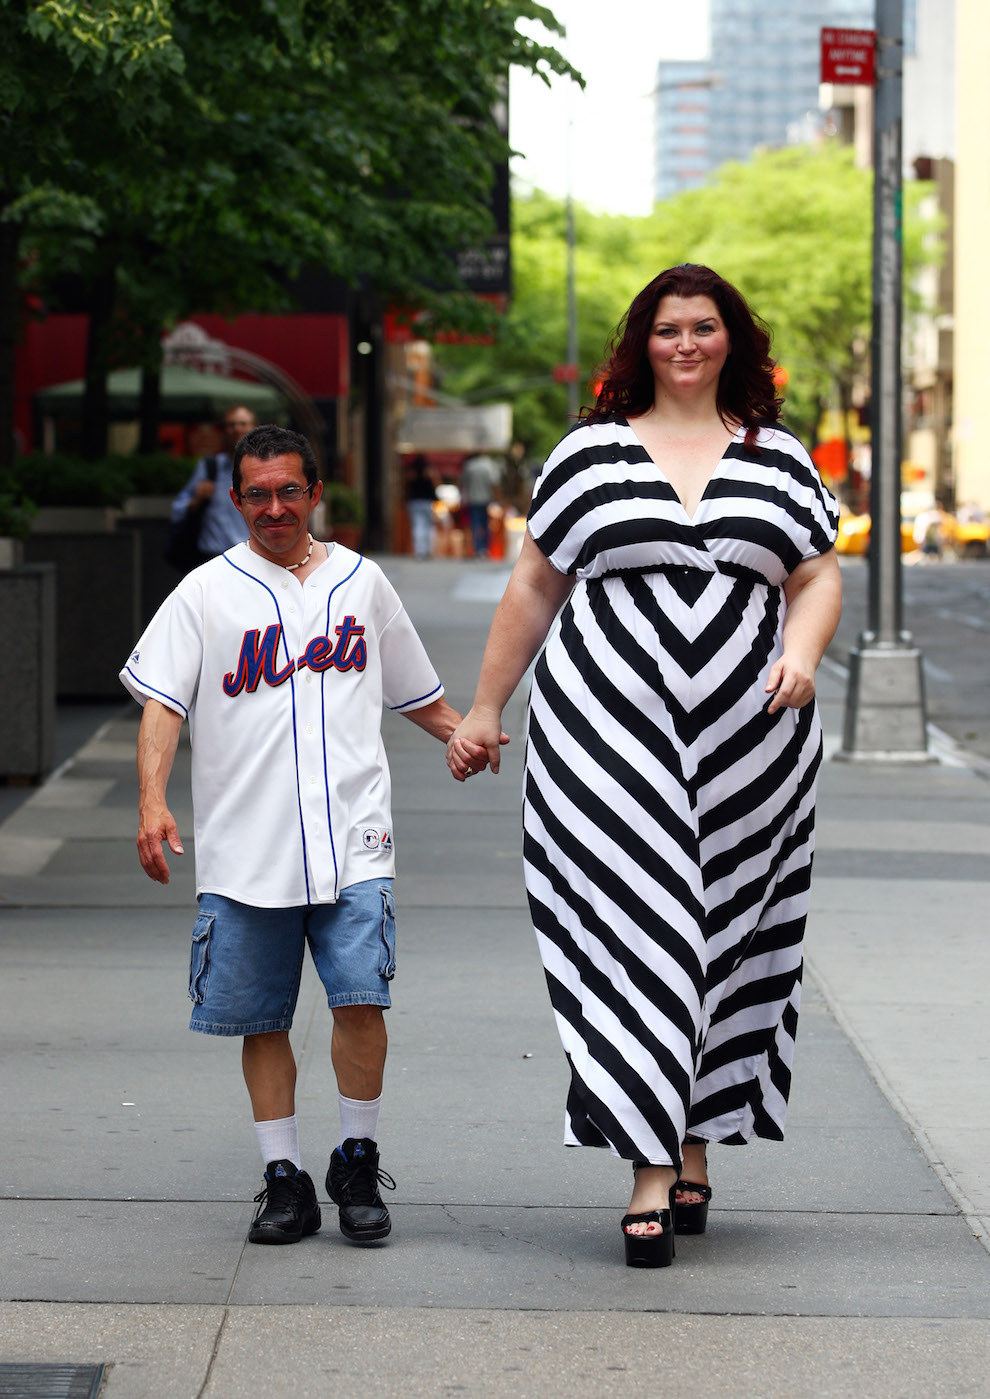 This Woman Is 6 Foot 3 Inches Tall, Weighs 20 Stone, And Gets Paid